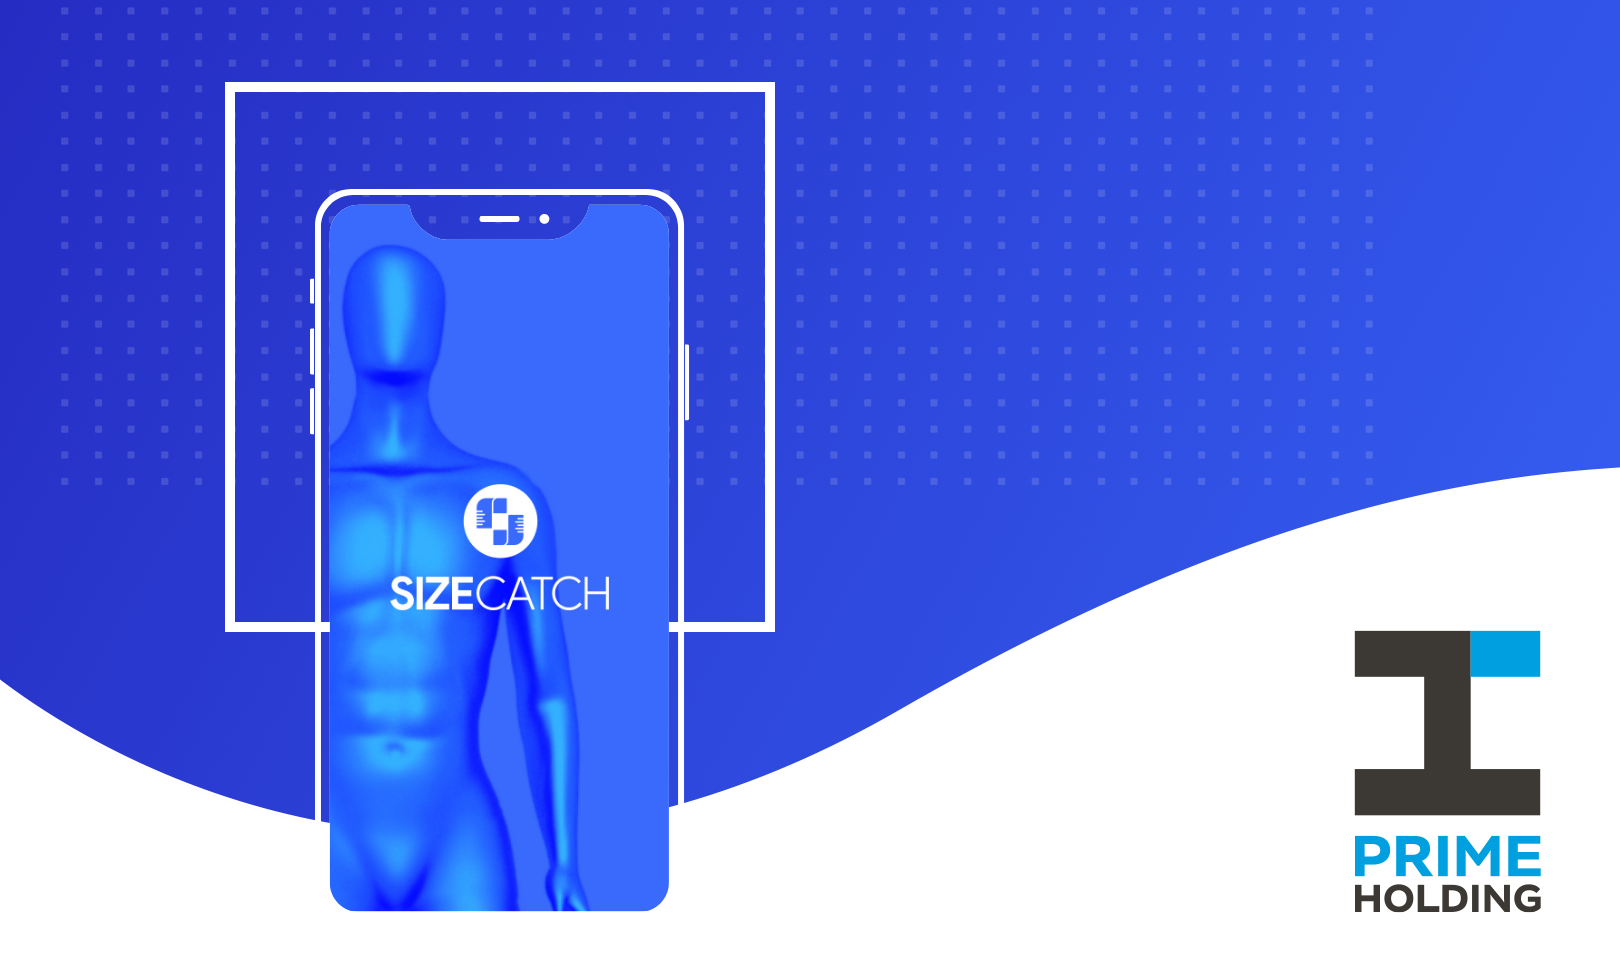 SizeСatch - Personal tailor in your pocket